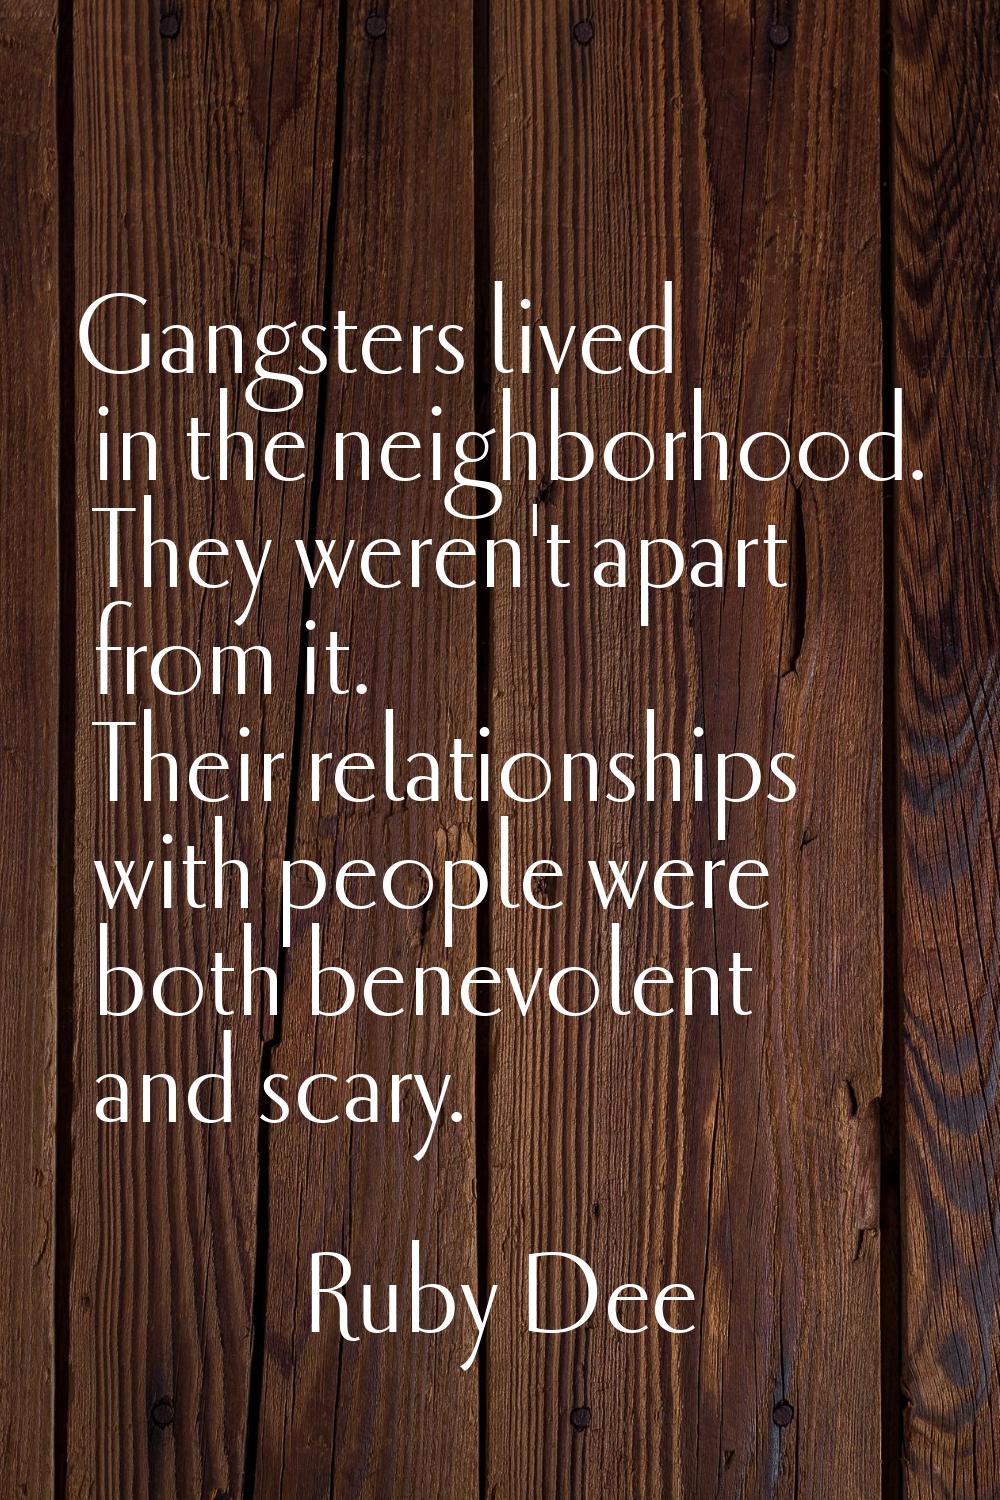 Gangsters lived in the neighborhood. They weren't apart from it. Their relationships with people we